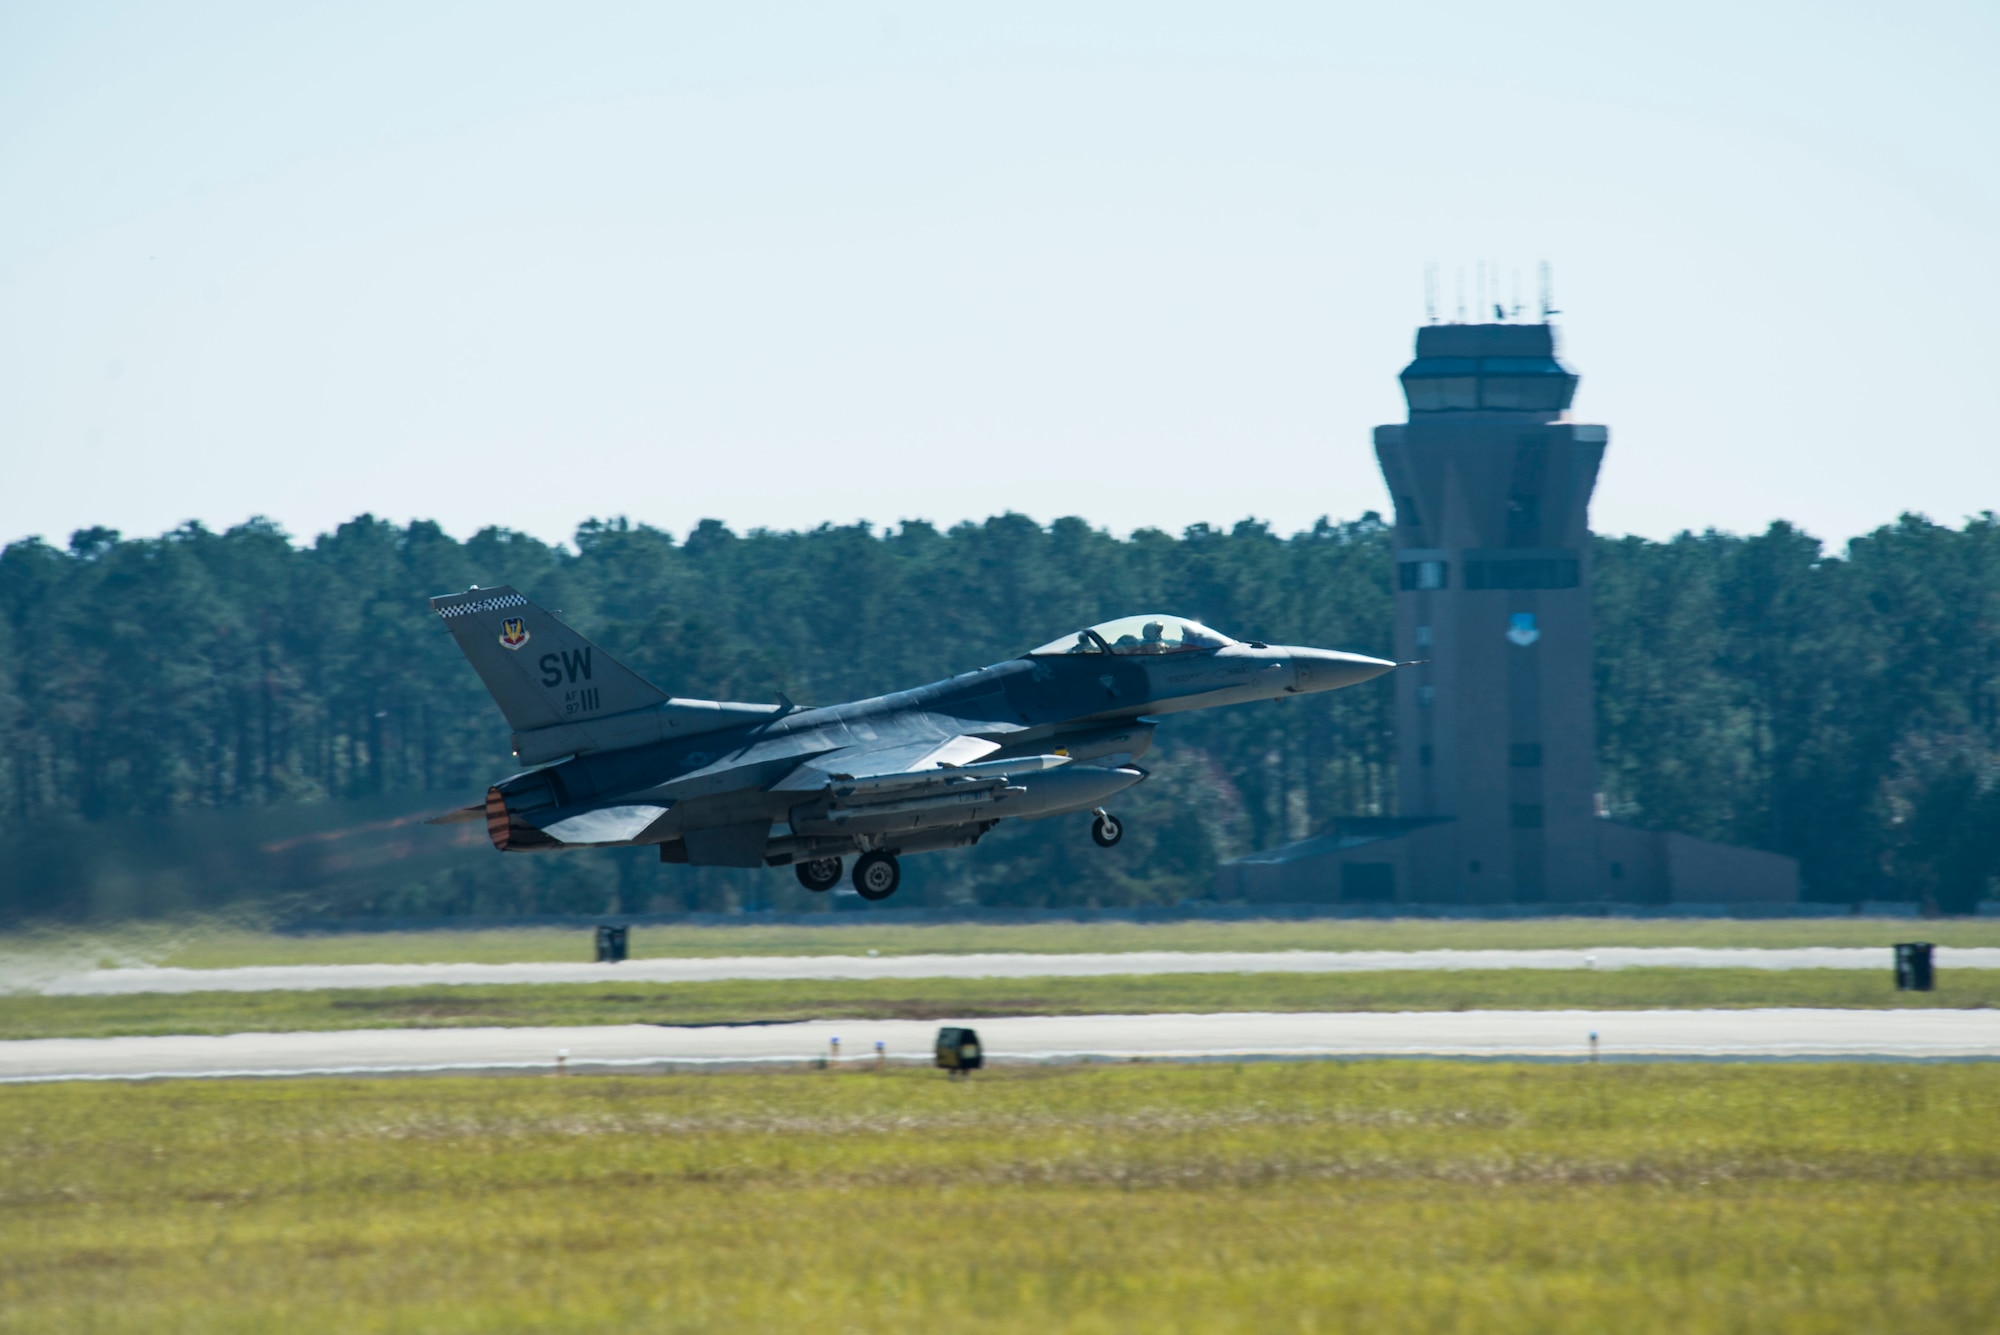 An F-16CM Fighting Falcon takes off from the flightline at Shaw Air Force Base, South Carolina, Nov. 16, 2017.